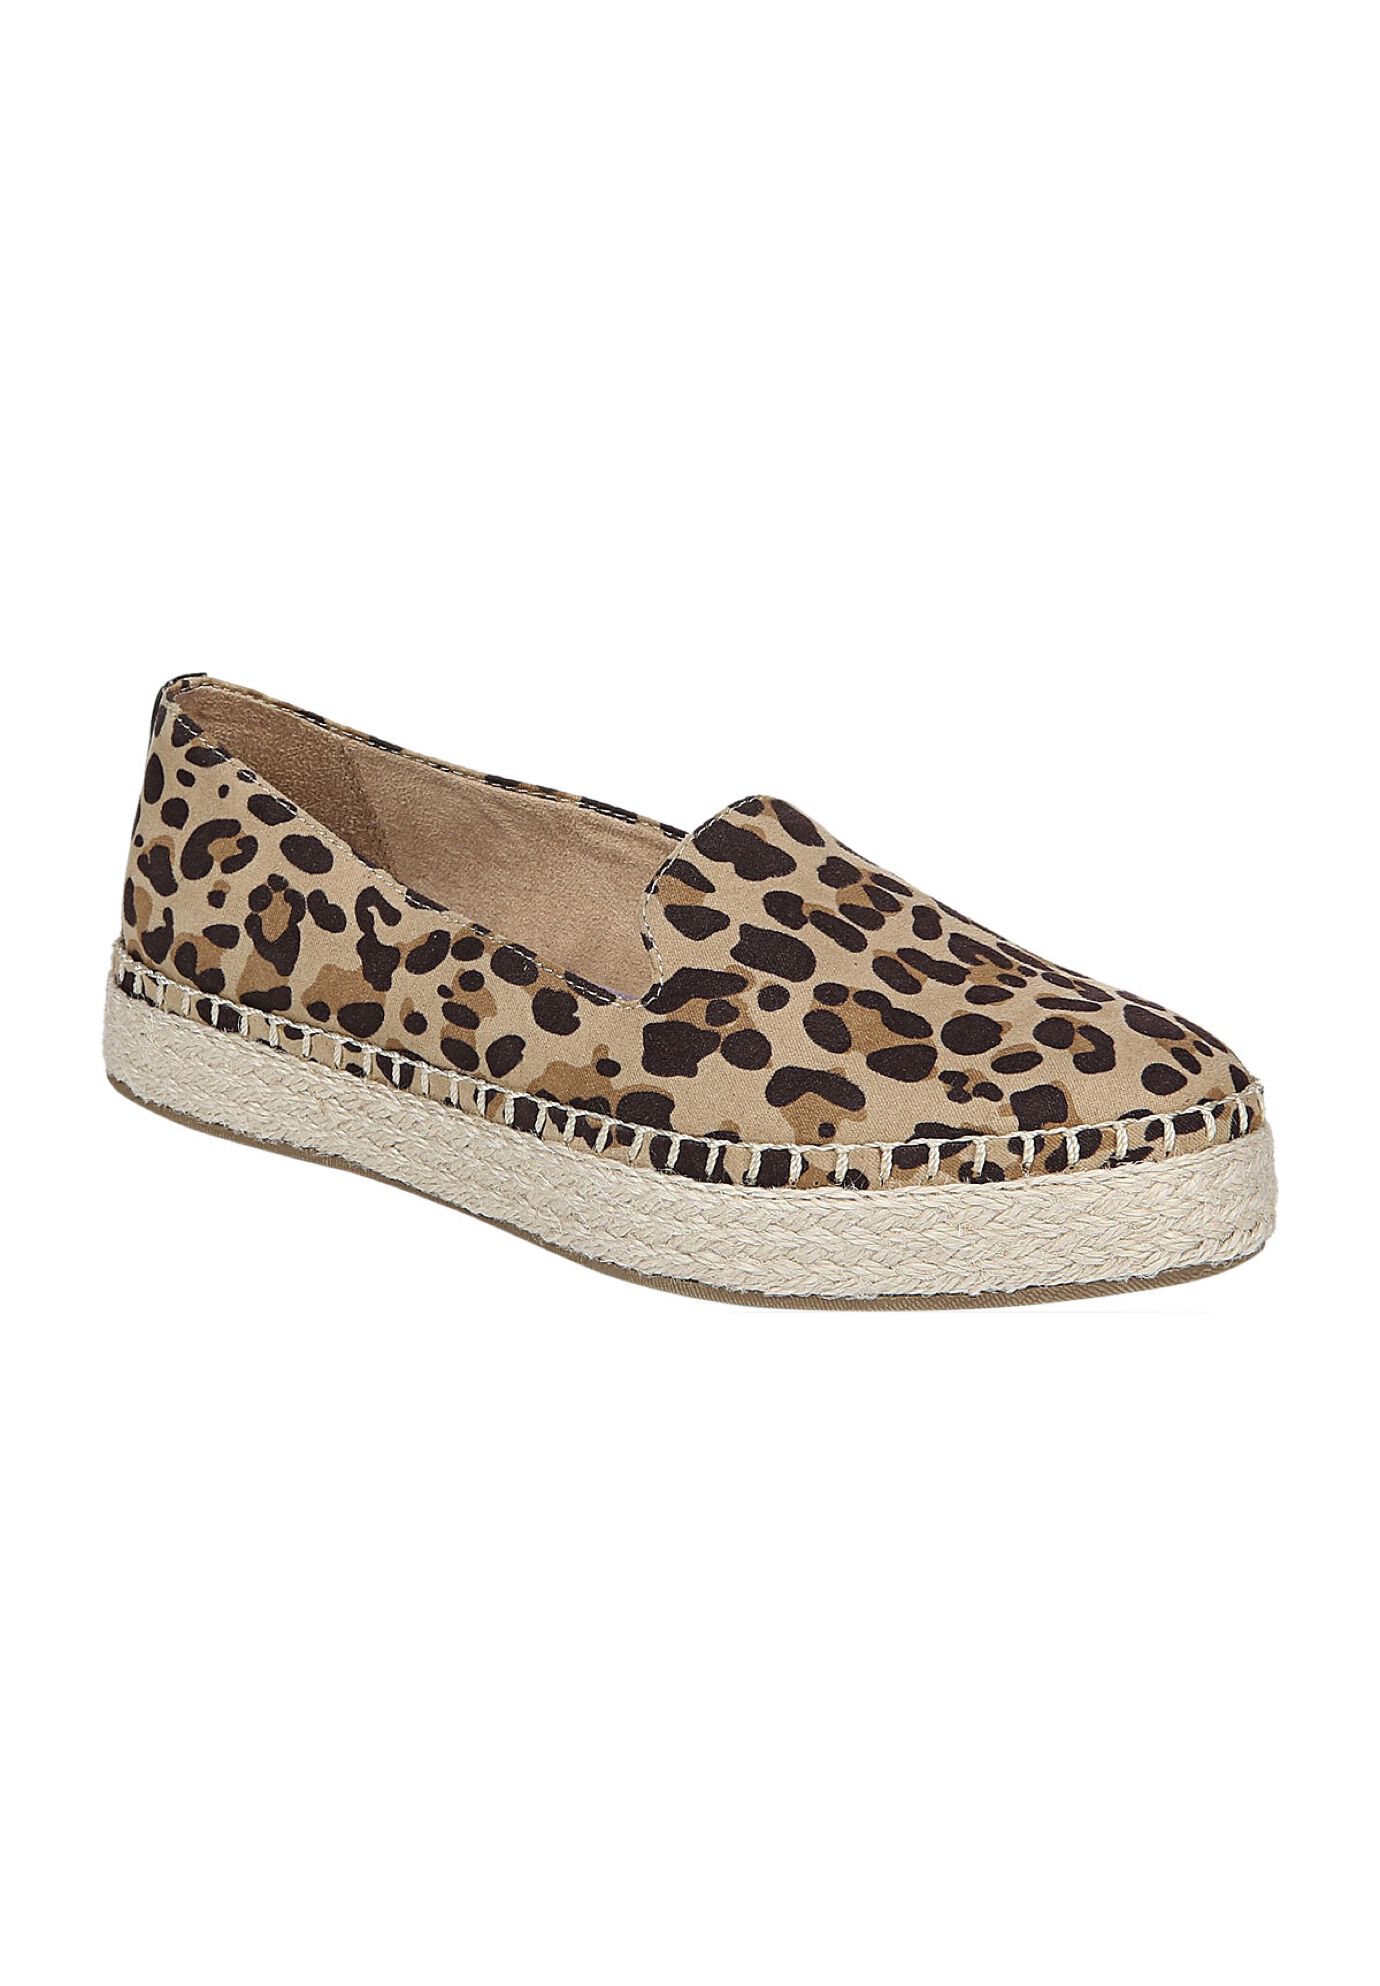 Find Me Espadrille by Dr. Scholl's 